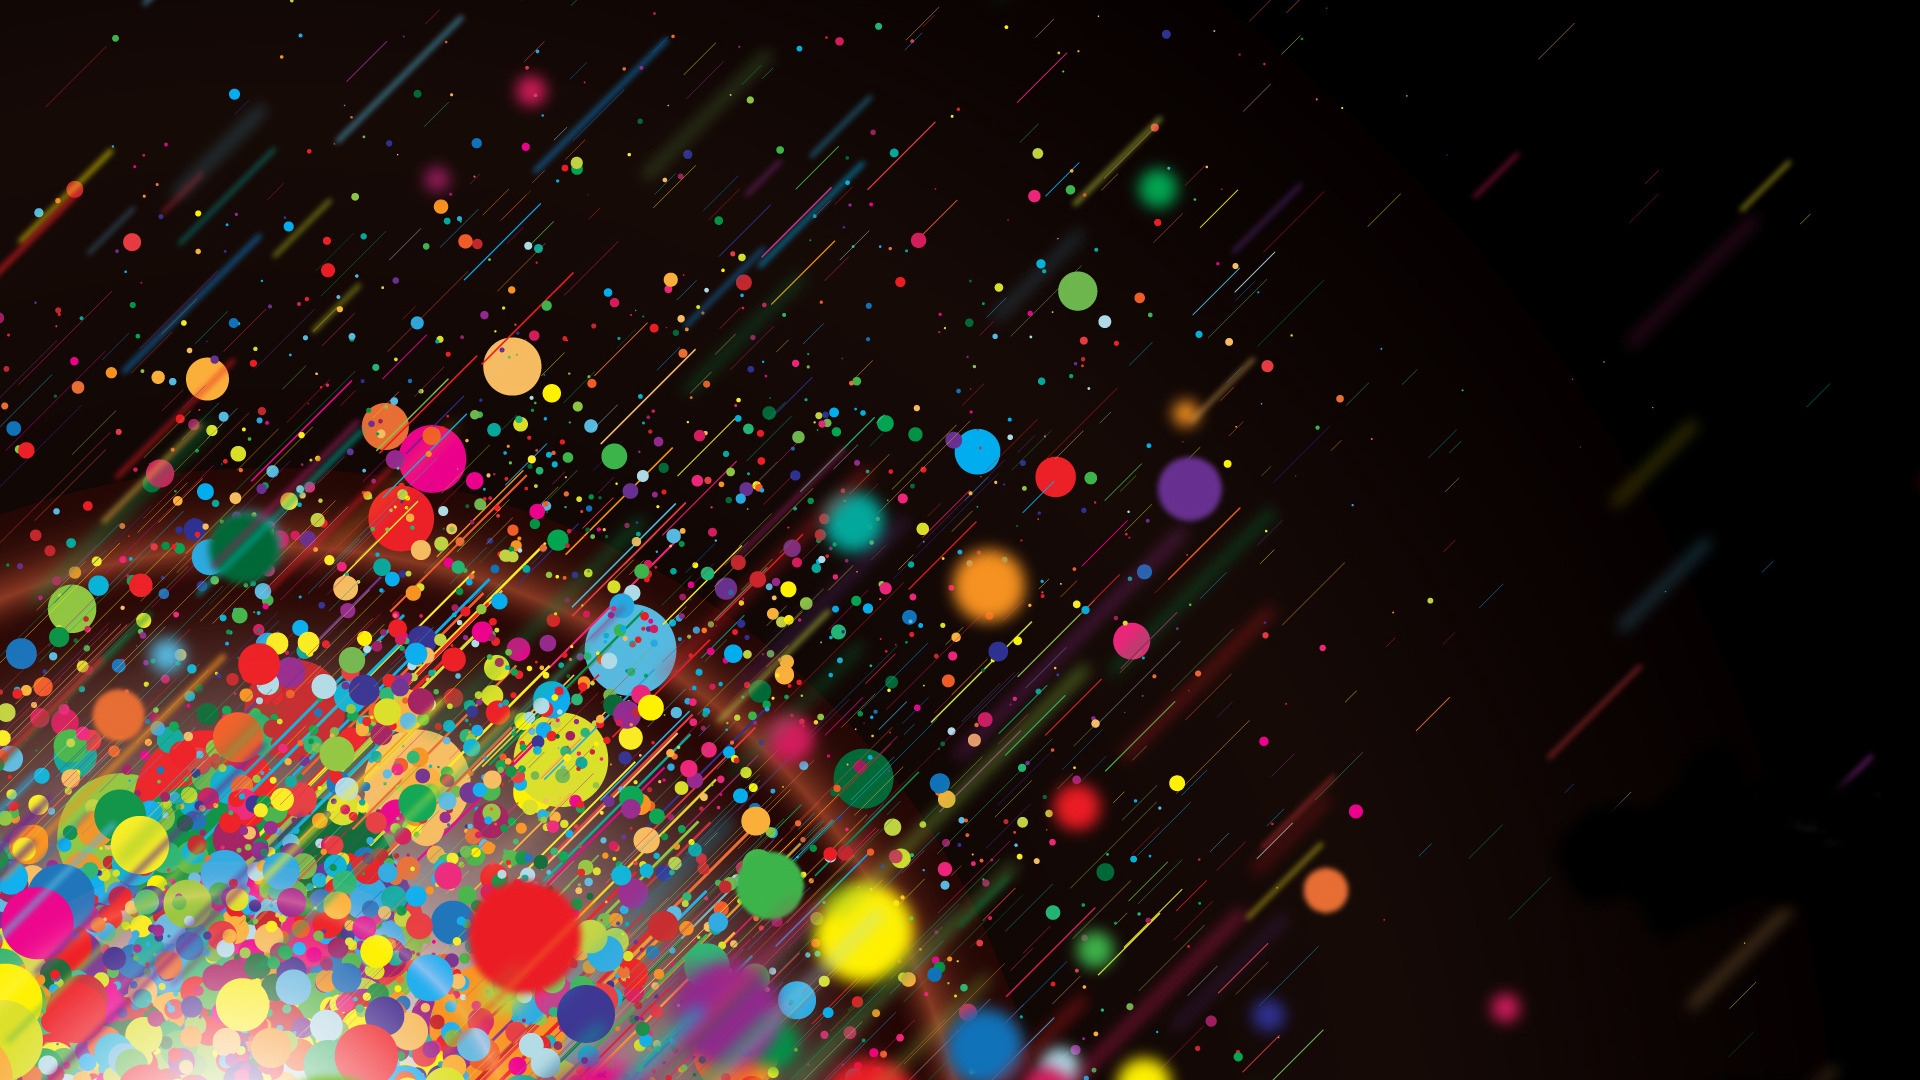 Colorful Dots for 1920 x 1080 HDTV 1080p resolution